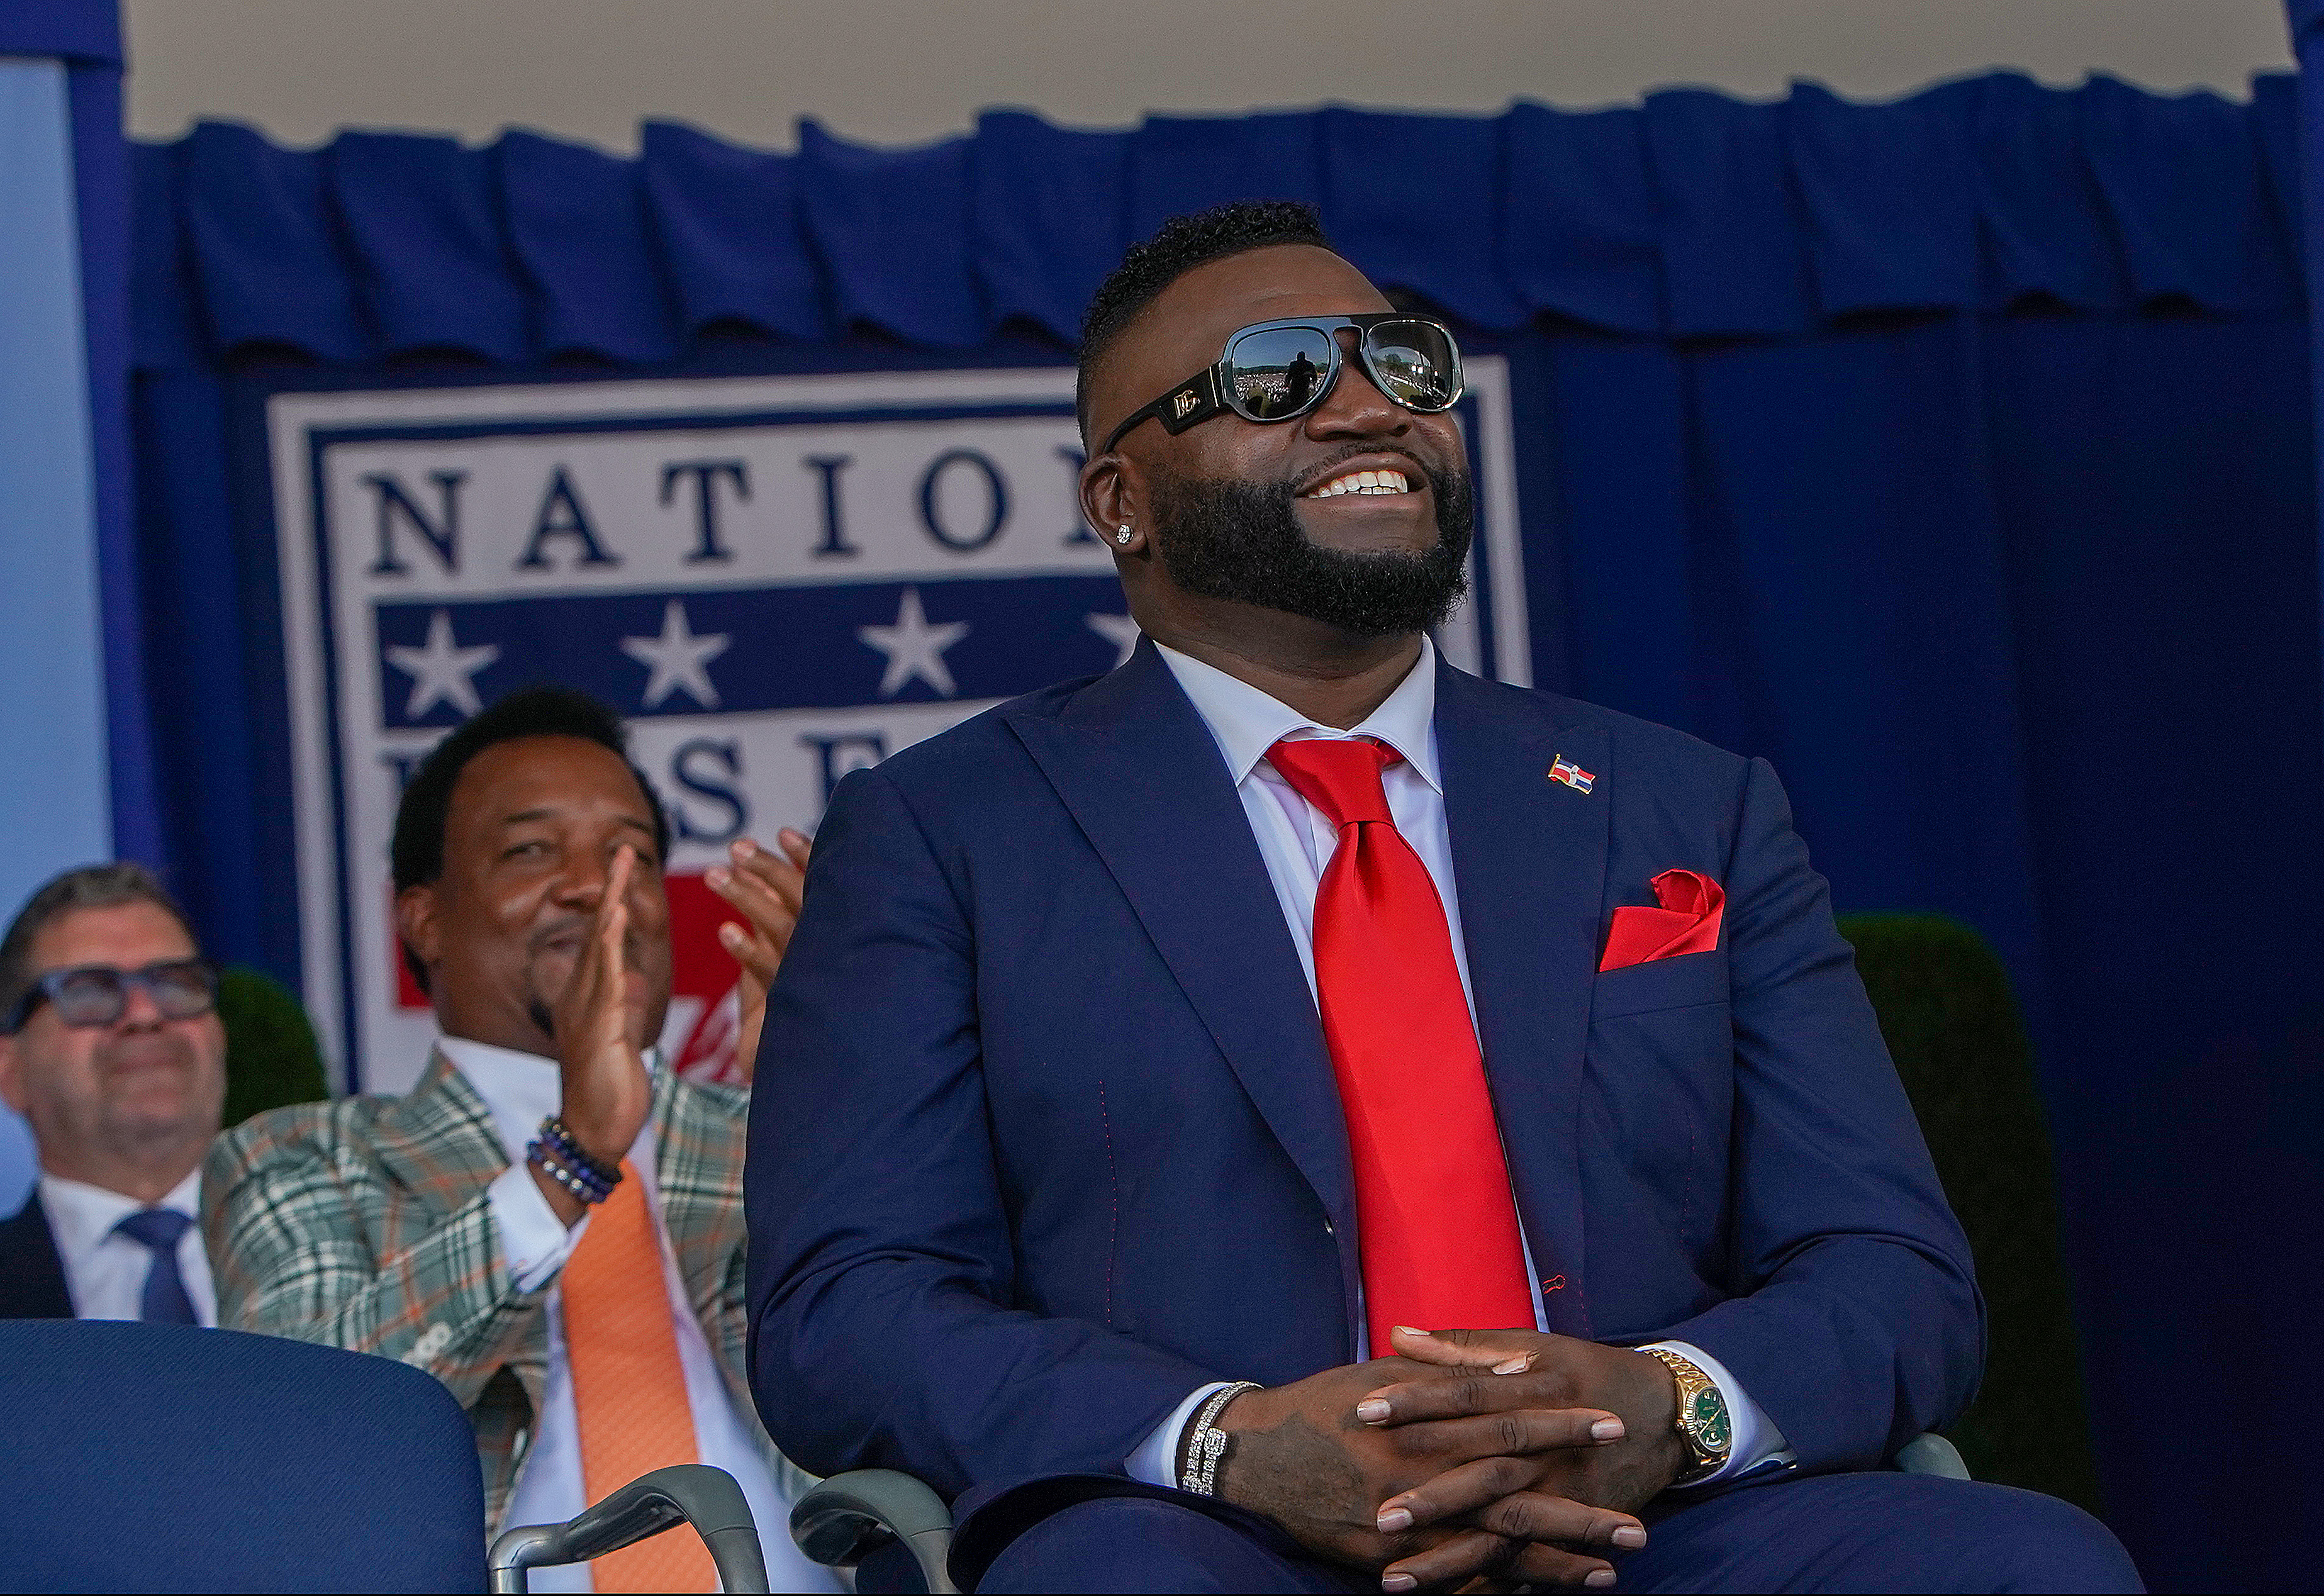 Ortiz lone player voted into Hall by BBWAA today - Lone Star Ball